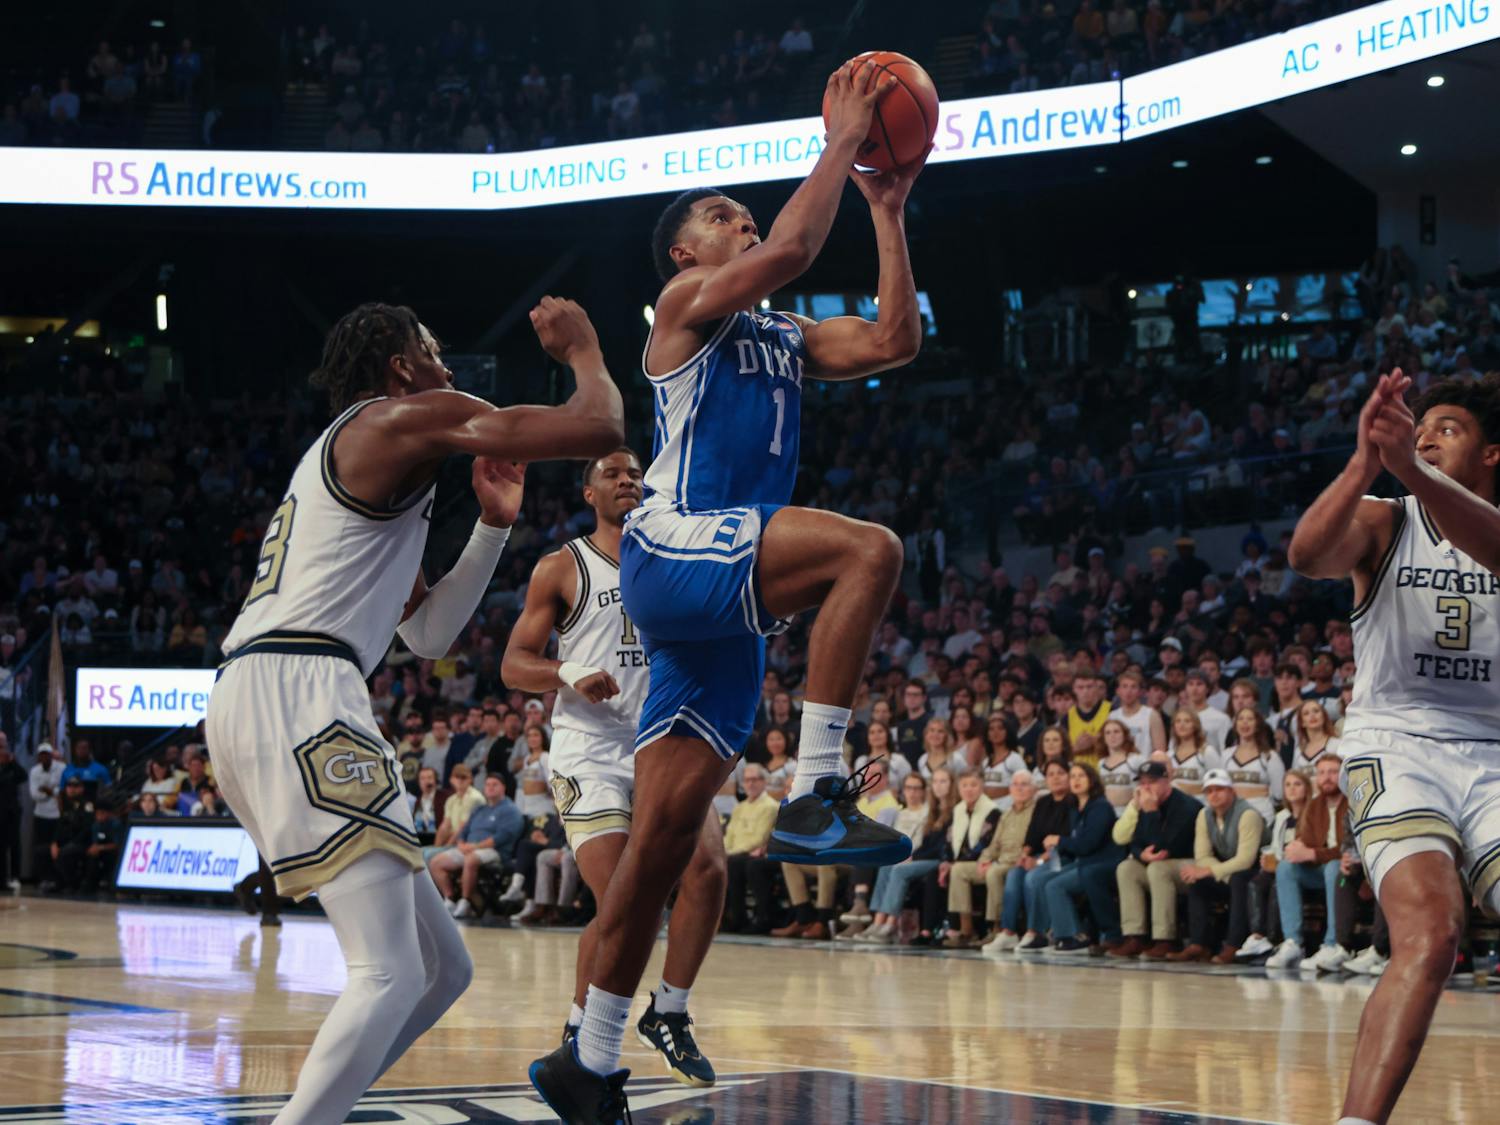 Caleb Foster jumps for the layup during a substitute appearance in Duke's loss to Georgia Tech.